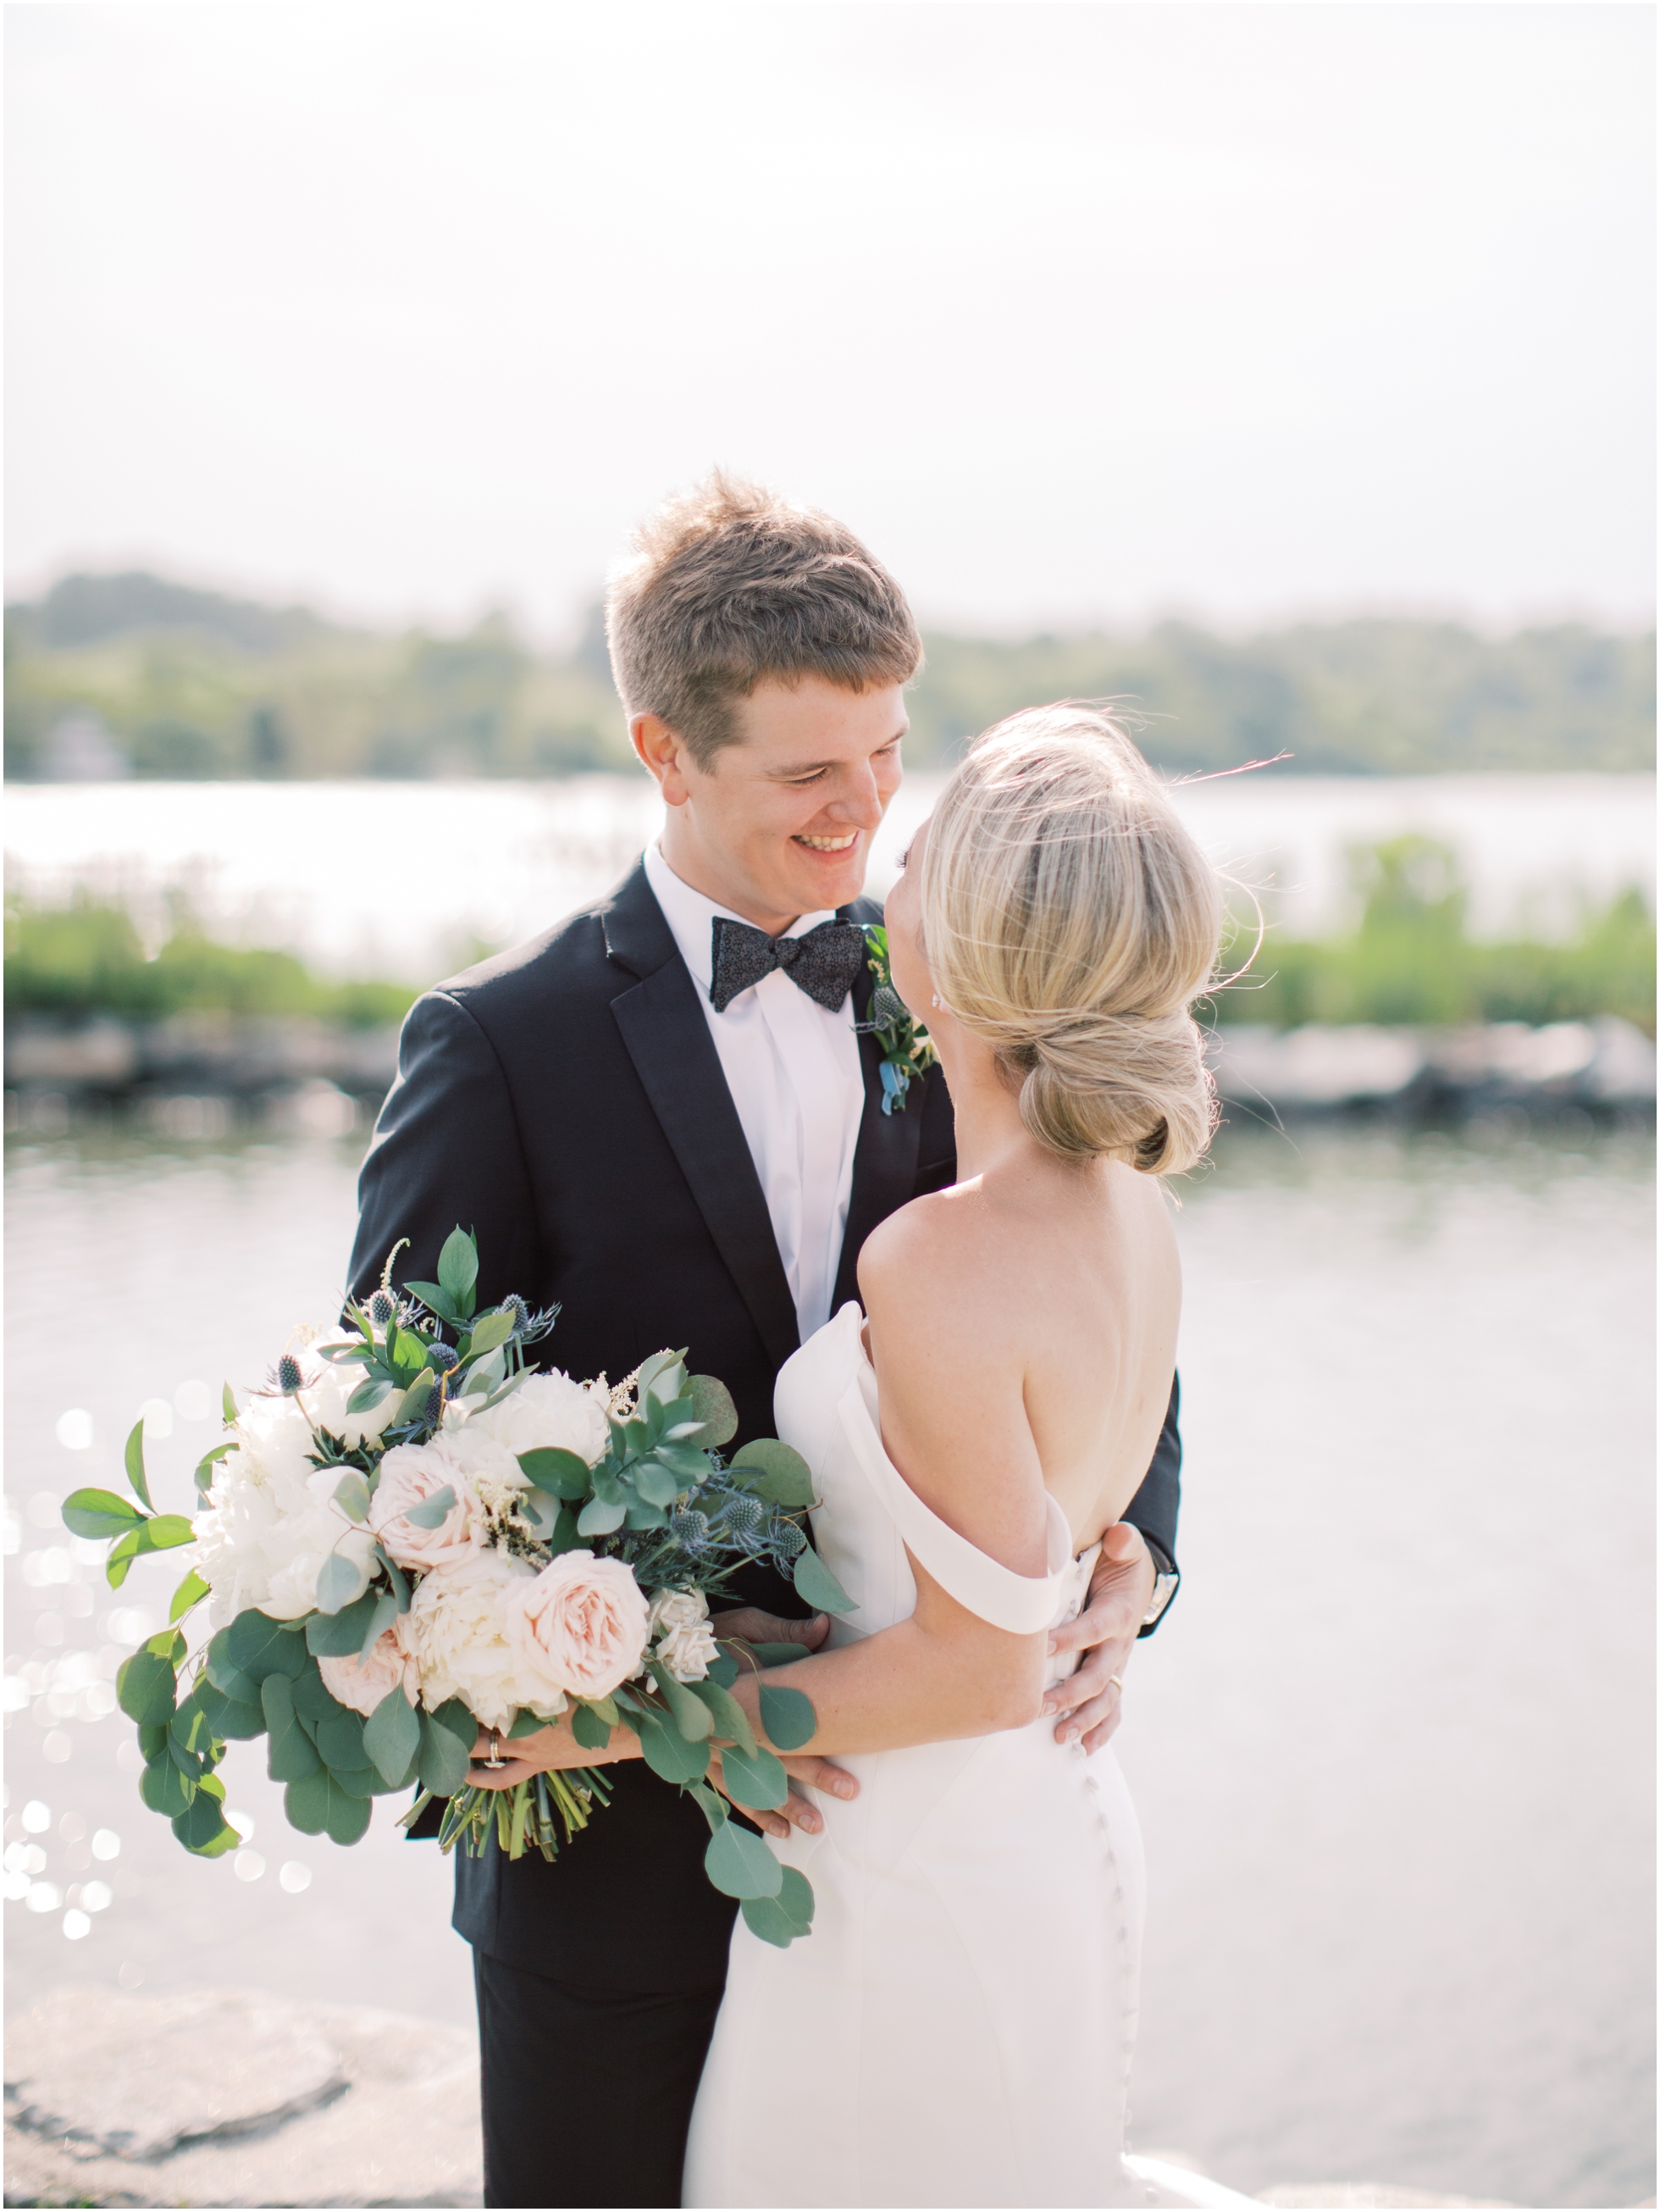 A May Wedding at Herrington on the Bay in North Beach, Maryland